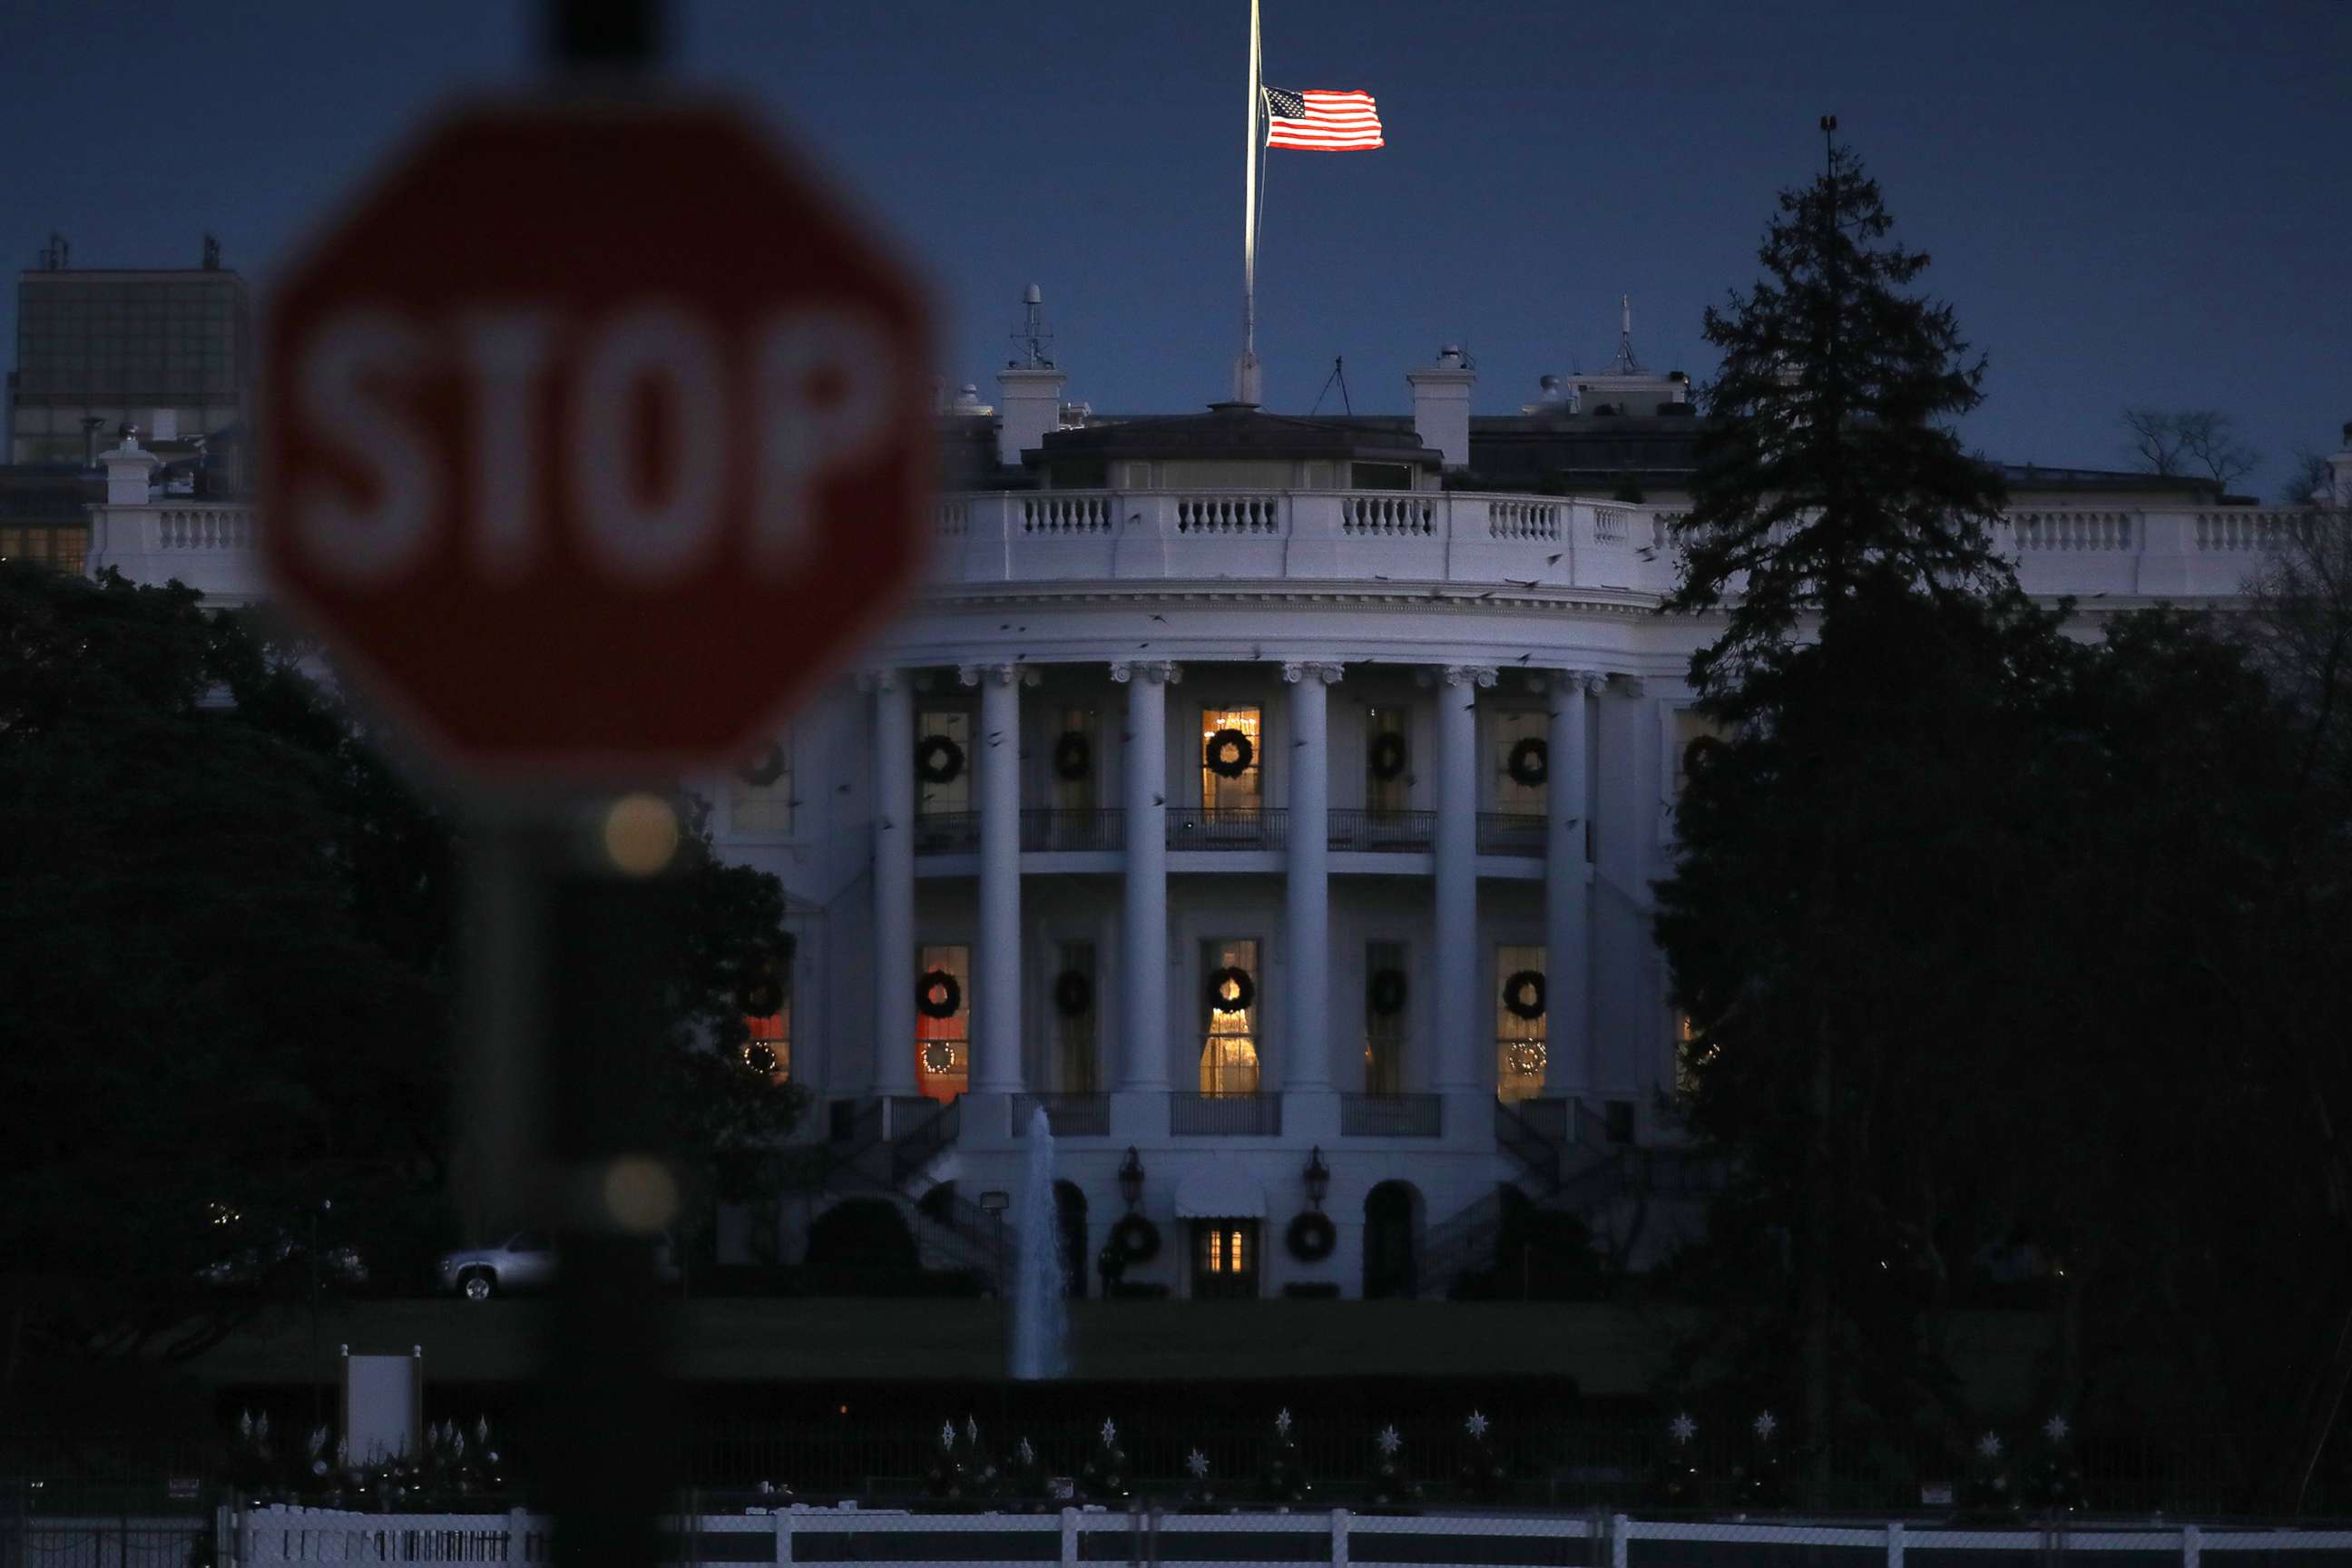 PHOTO: The White House is lit in the evening during a partial shutdown of the federal government on Dec. 24, 2018 in Washington.